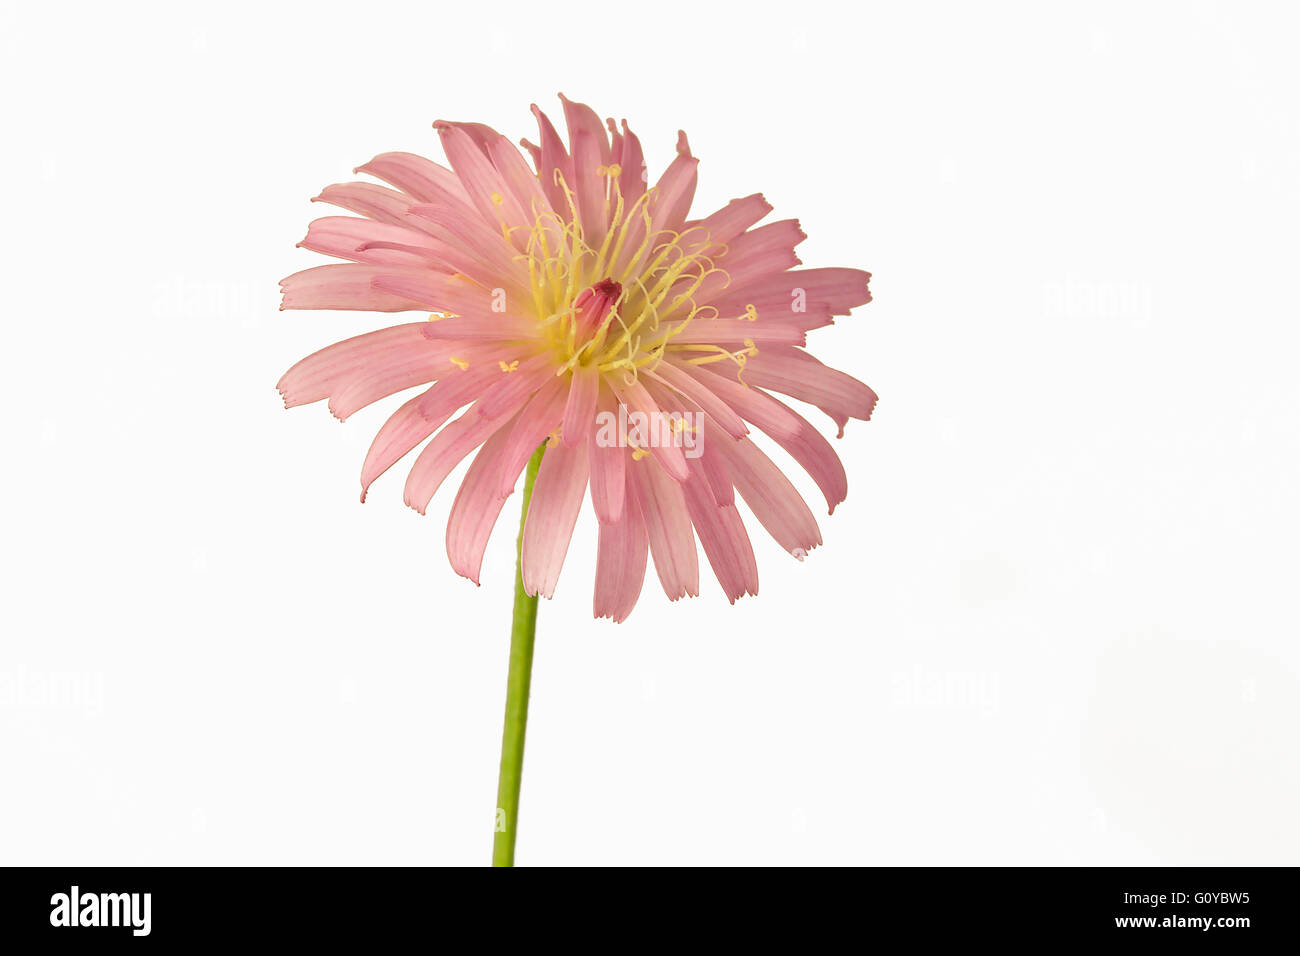 Pink dandelion, Crepis, Crepis incana, Beauty in Nature, Colour, Contemporary, Creative, Cut out, Deciduous, Flower, Autumn Flowering, Summer Flowering, Frost hardy, Greece Indigenous, Perennial, Plant, Stamen, Studio, Pink, Stock Photo